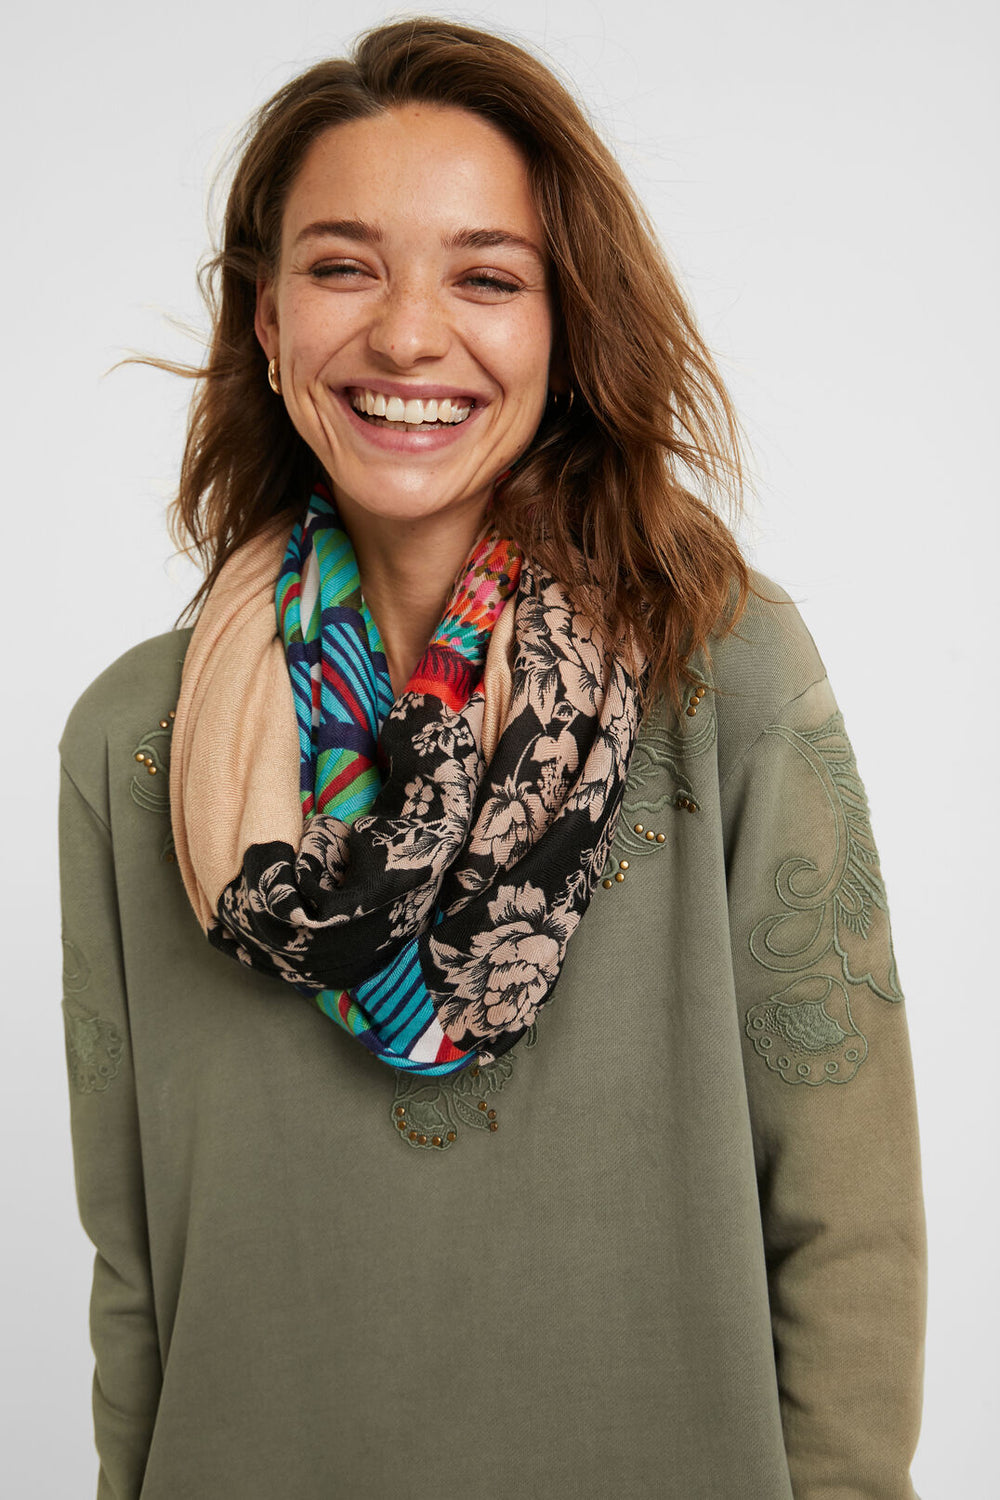 Printed Floral Loop Infinity Scarf
This closed loop foulard is like a knit necklace to protect the neck. With floral print, coloured friezes and mandalas contrasting with each other, is an original and stylish accessory complements all your looks very well. Floral multi print of mandalas and friezes Collar type closed loop neck Casual style Outer fabric composition: 2% CASHMERE, 10% POLYAMIDE, 50% POLYESTER, 18% MODAL, 20% VISCOSE
Printed Floral Loop Infinity Scarf
Closed loop foulard is like a knit necklac